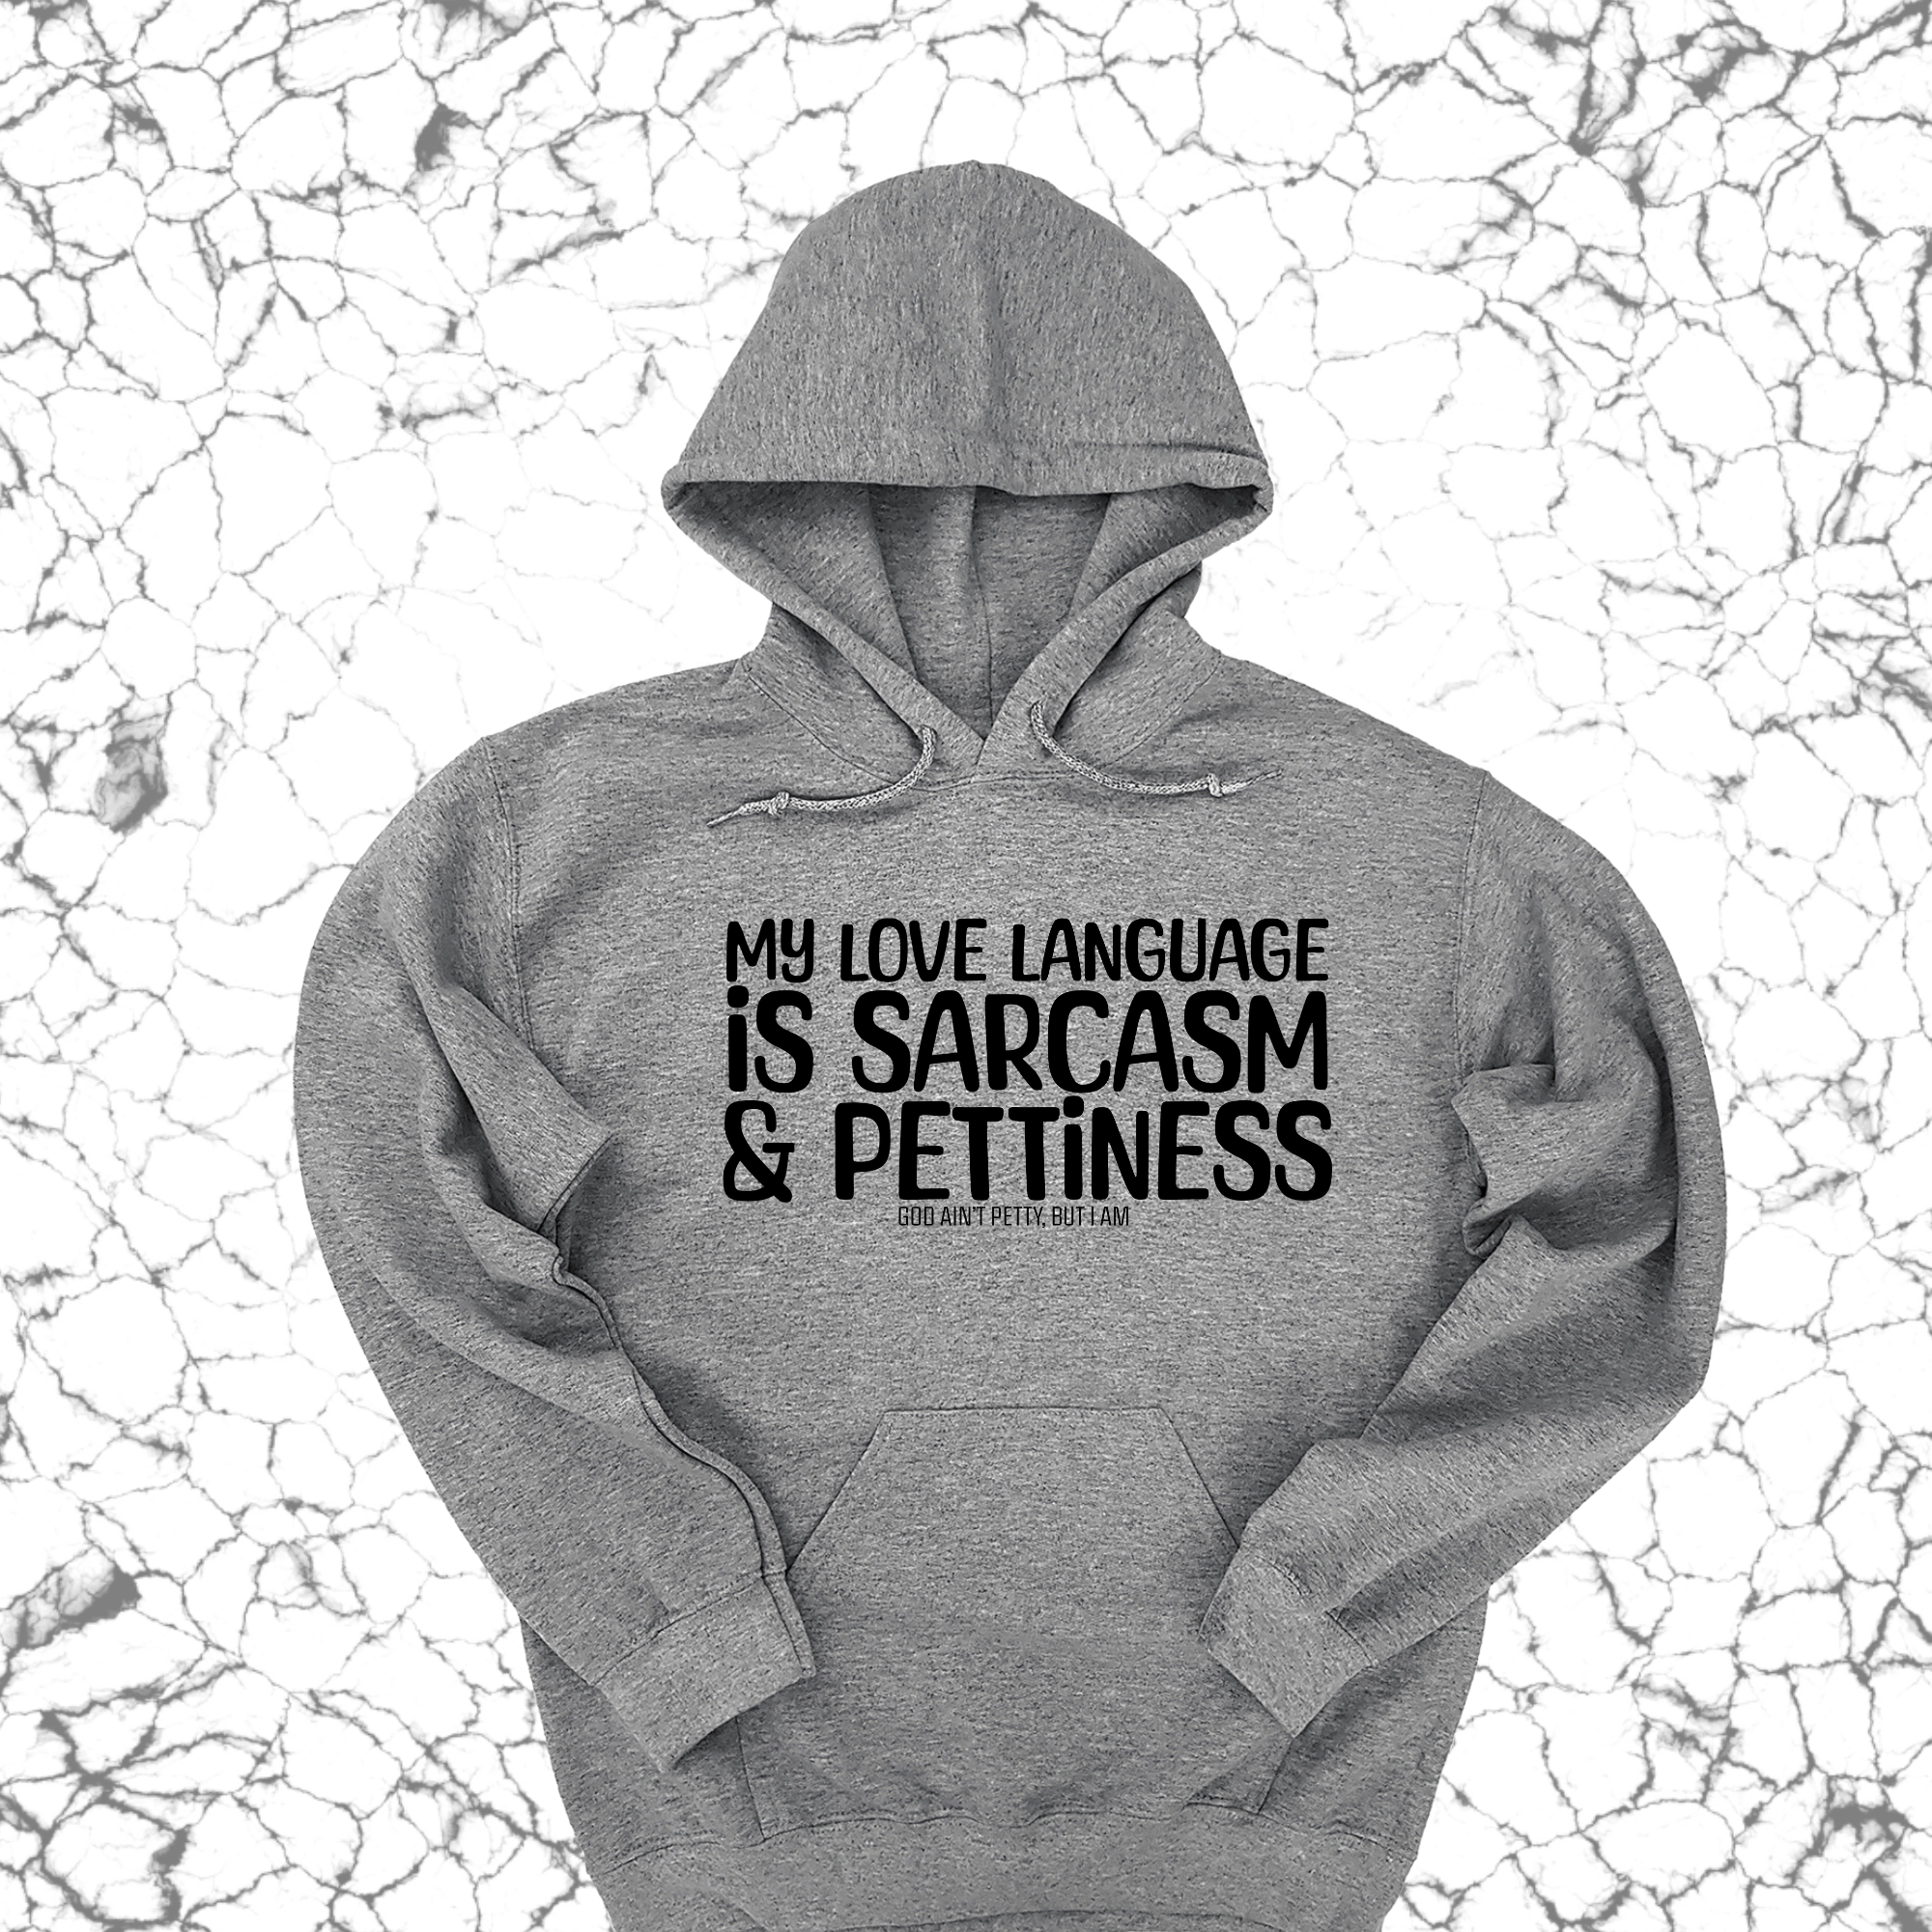 My Love language is sarcasm and pettiness Unisex Hoodie-Hoodie-The Original God Ain't Petty But I Am